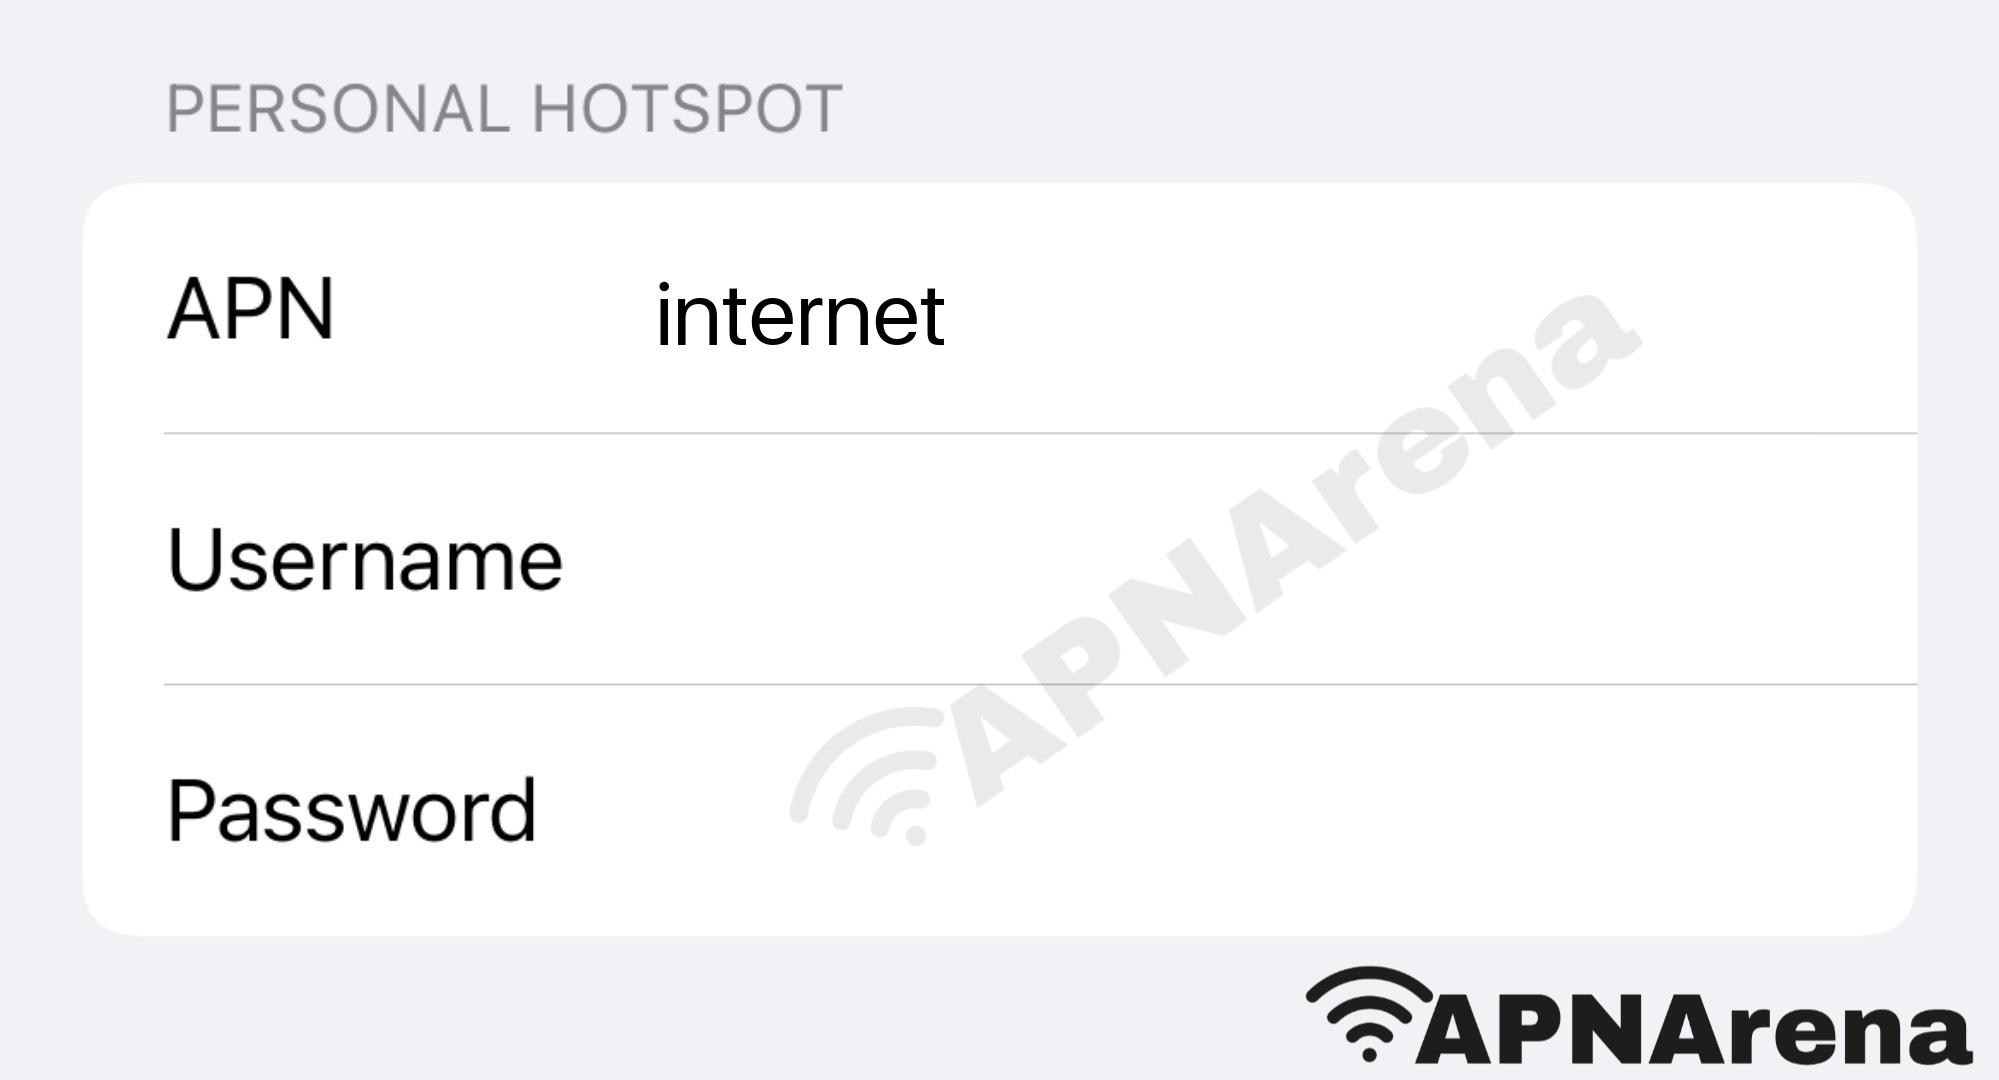 TELE Greenland Personal Hotspot Settings for iPhone